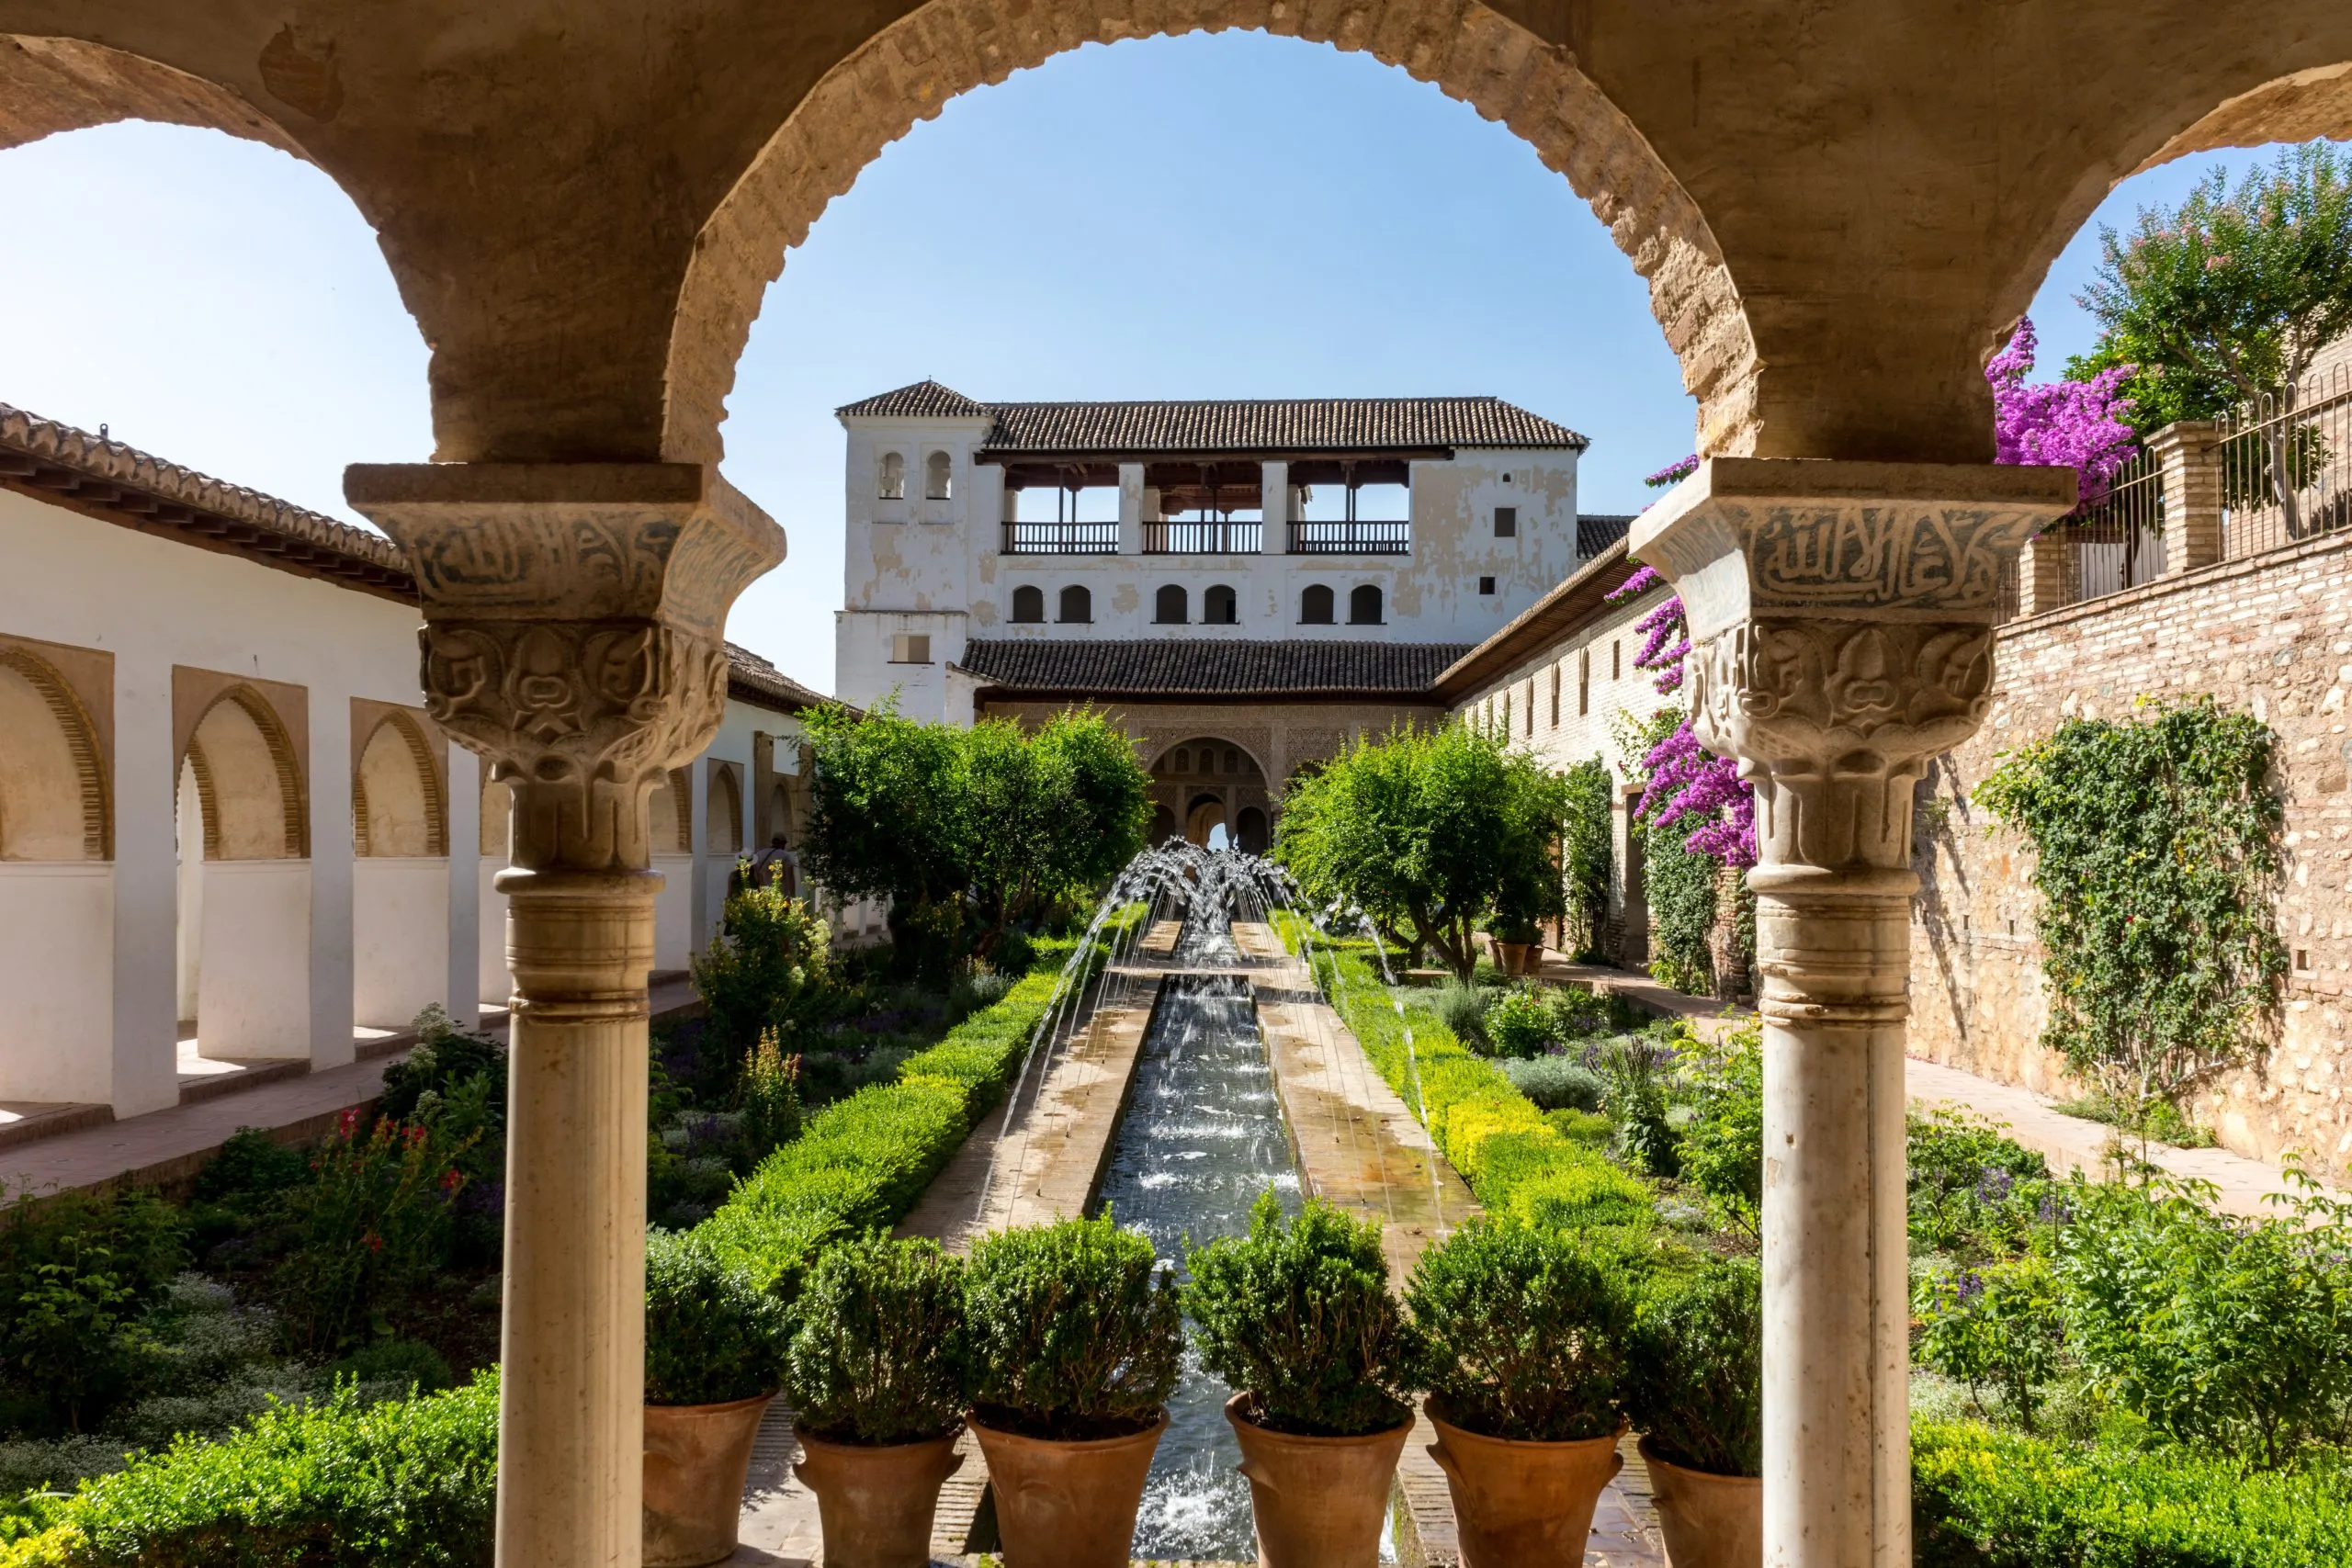 view of generalife gardens from inside courtyard, as seen when visiting the alhambra tips